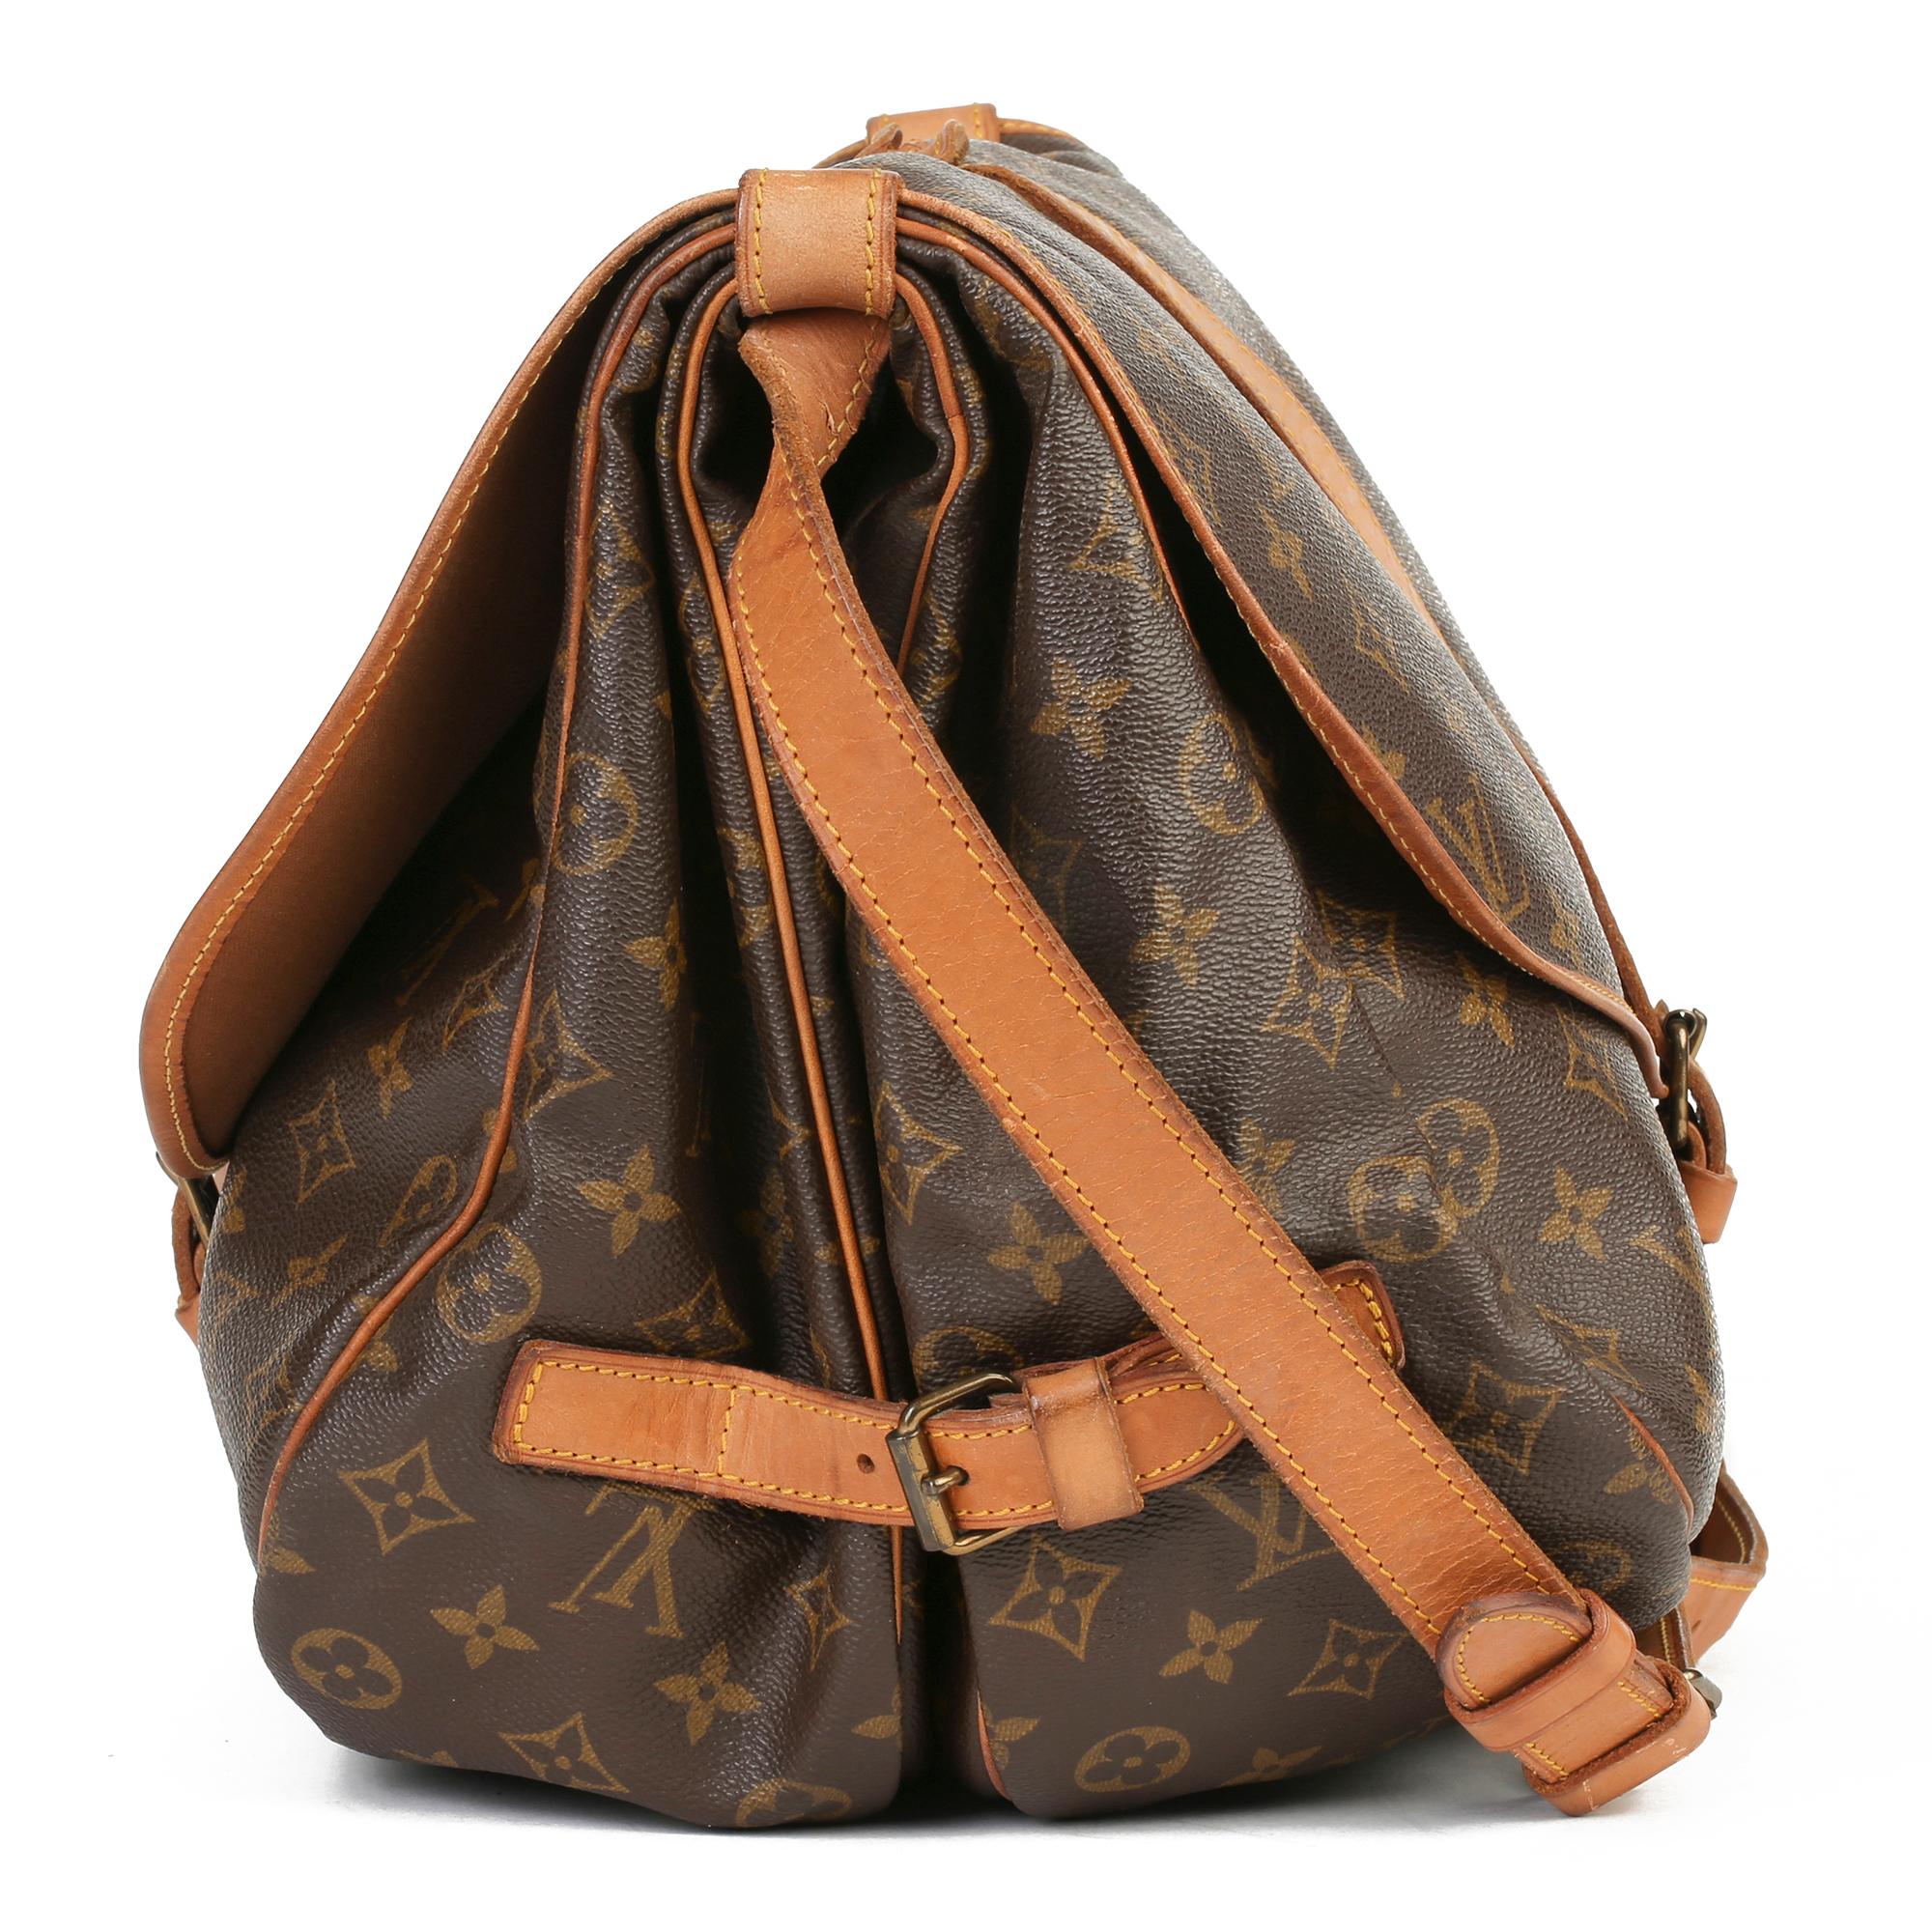 LOUIS VUITTON
Brown Monogram Coated Canvas Vintage Samur 356

Xupes Reference: HB3778
Serial Number: 881.V.I
Age (Circa): 1981
Authenticity Details: Date Stamp (Made in France) 
Gender: Ladies
Type: Shoulder, Crossbody 

Colour: Brown
Hardware: